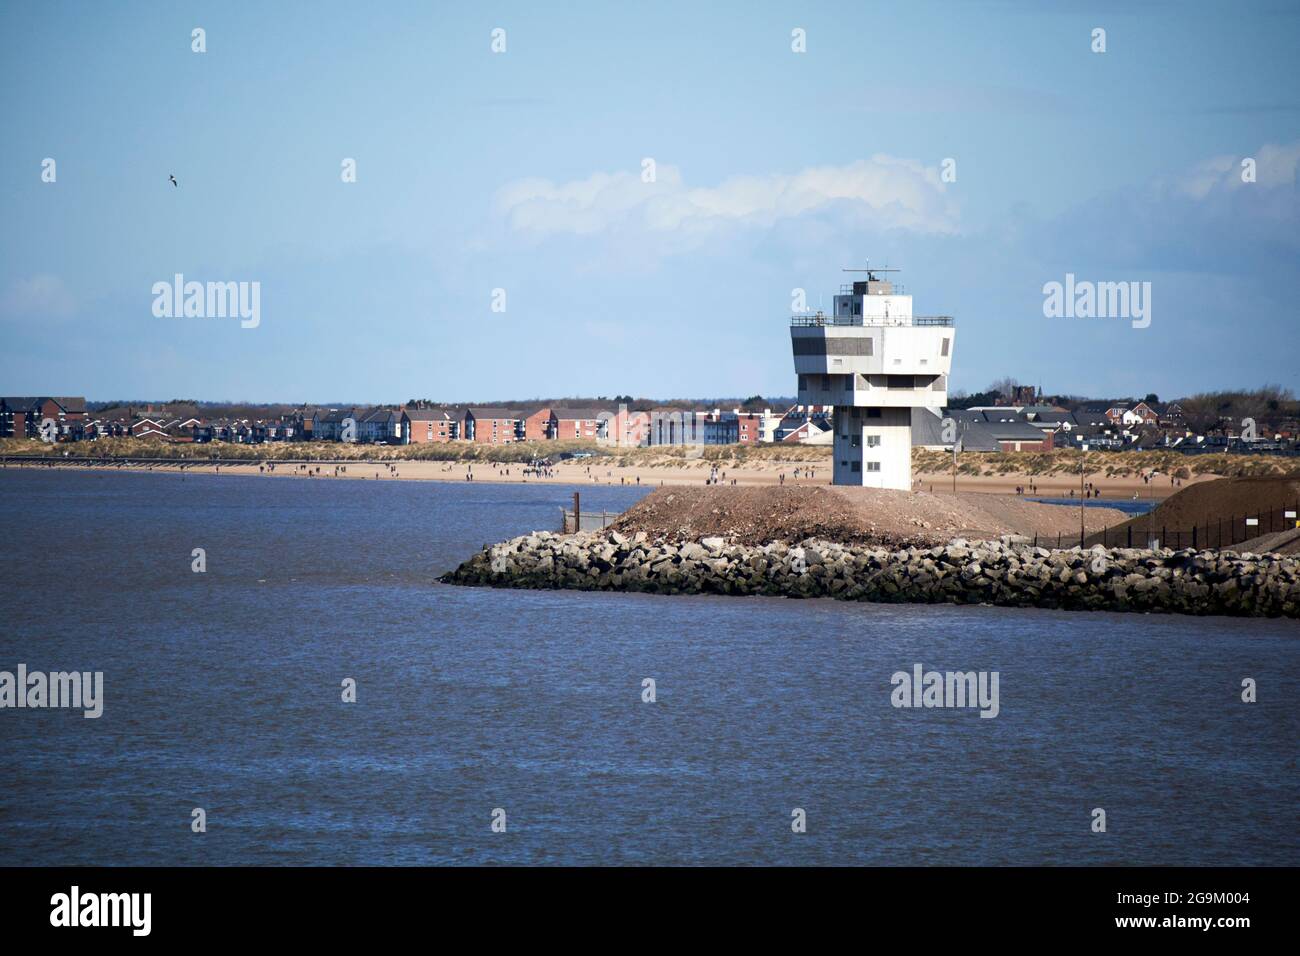 derelict Seaforth radar tower at the river mersey entrance to the port area of liverpool with crosby beach in the background england uk Stock Photo